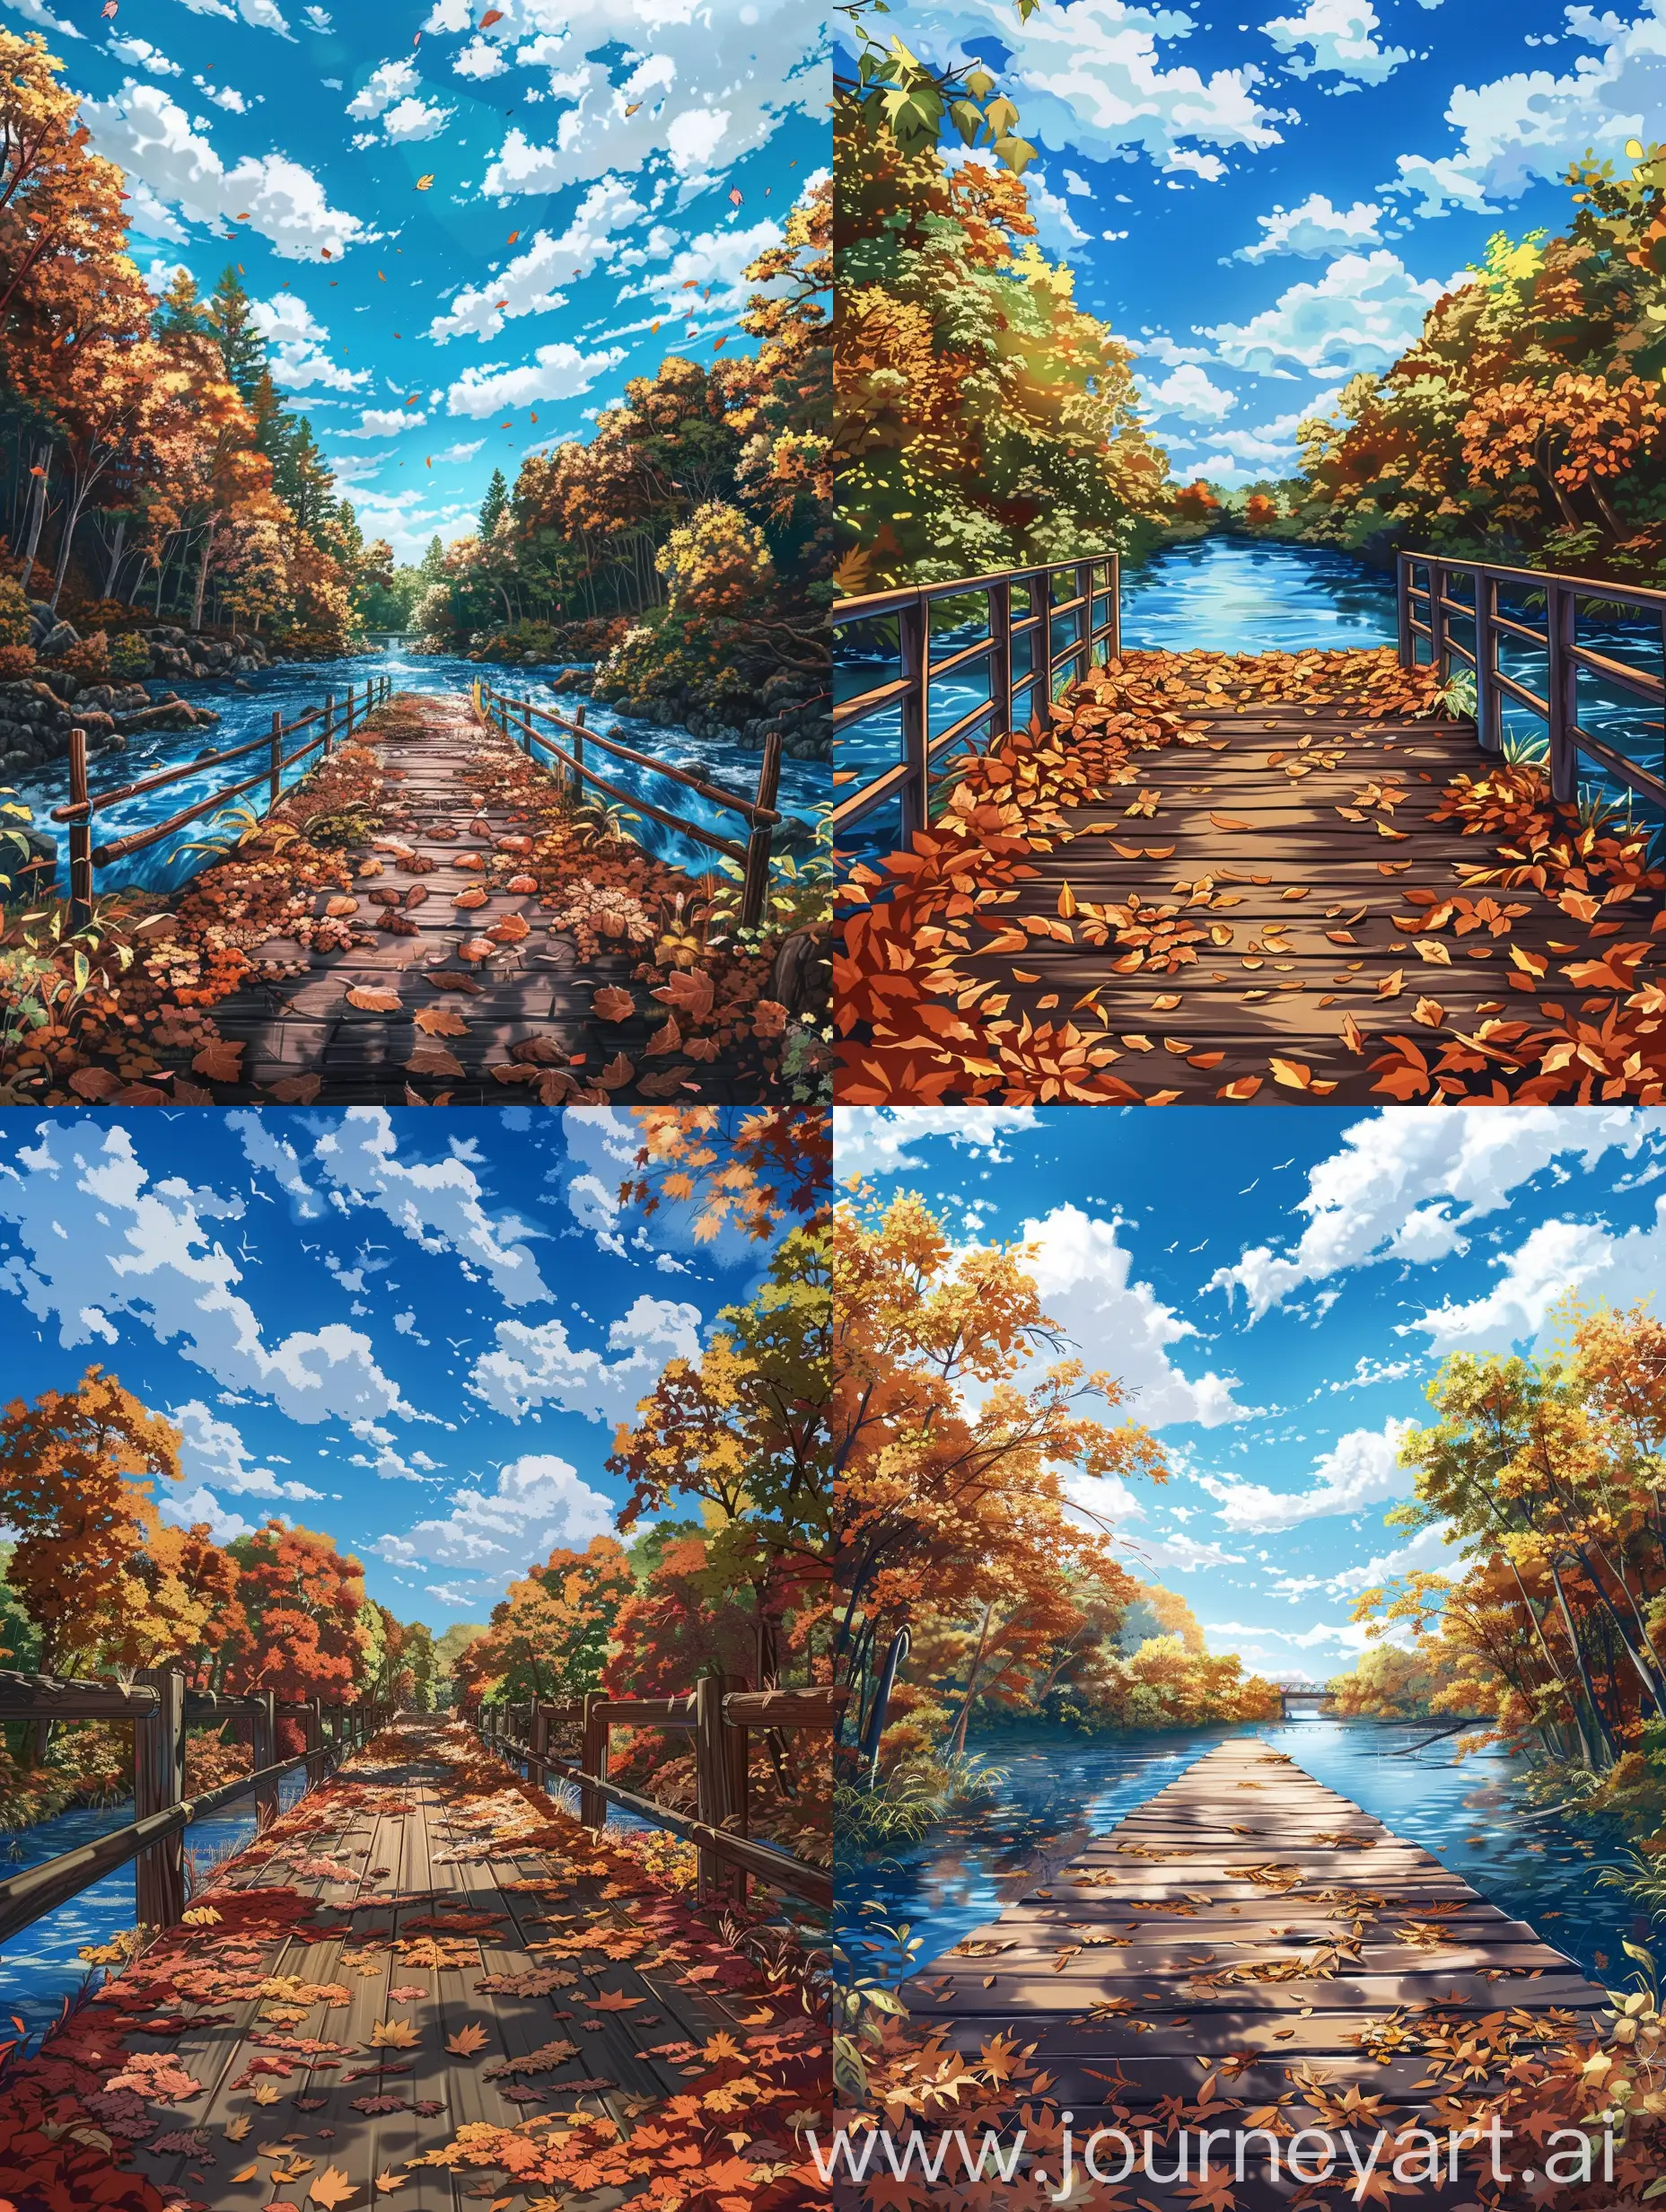 In the autumn forest there is a wide river, above which there is a wooden bridge.  The floor of this bridge is full of fallen leaves since it is autumn.  Anime style. blue sky with white clouds.